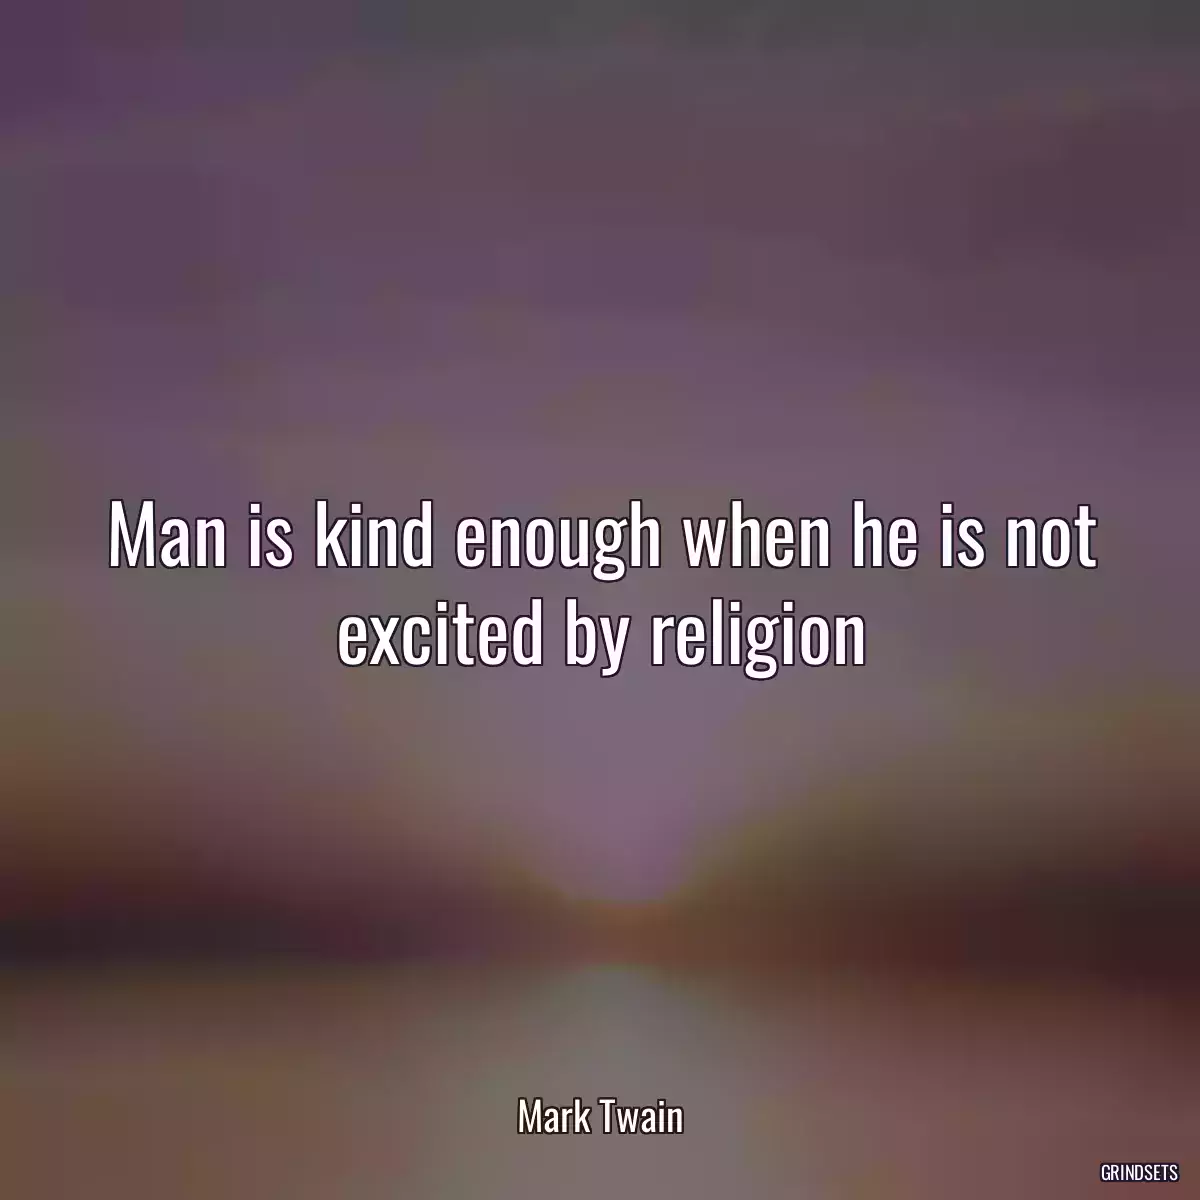 Man is kind enough when he is not excited by religion